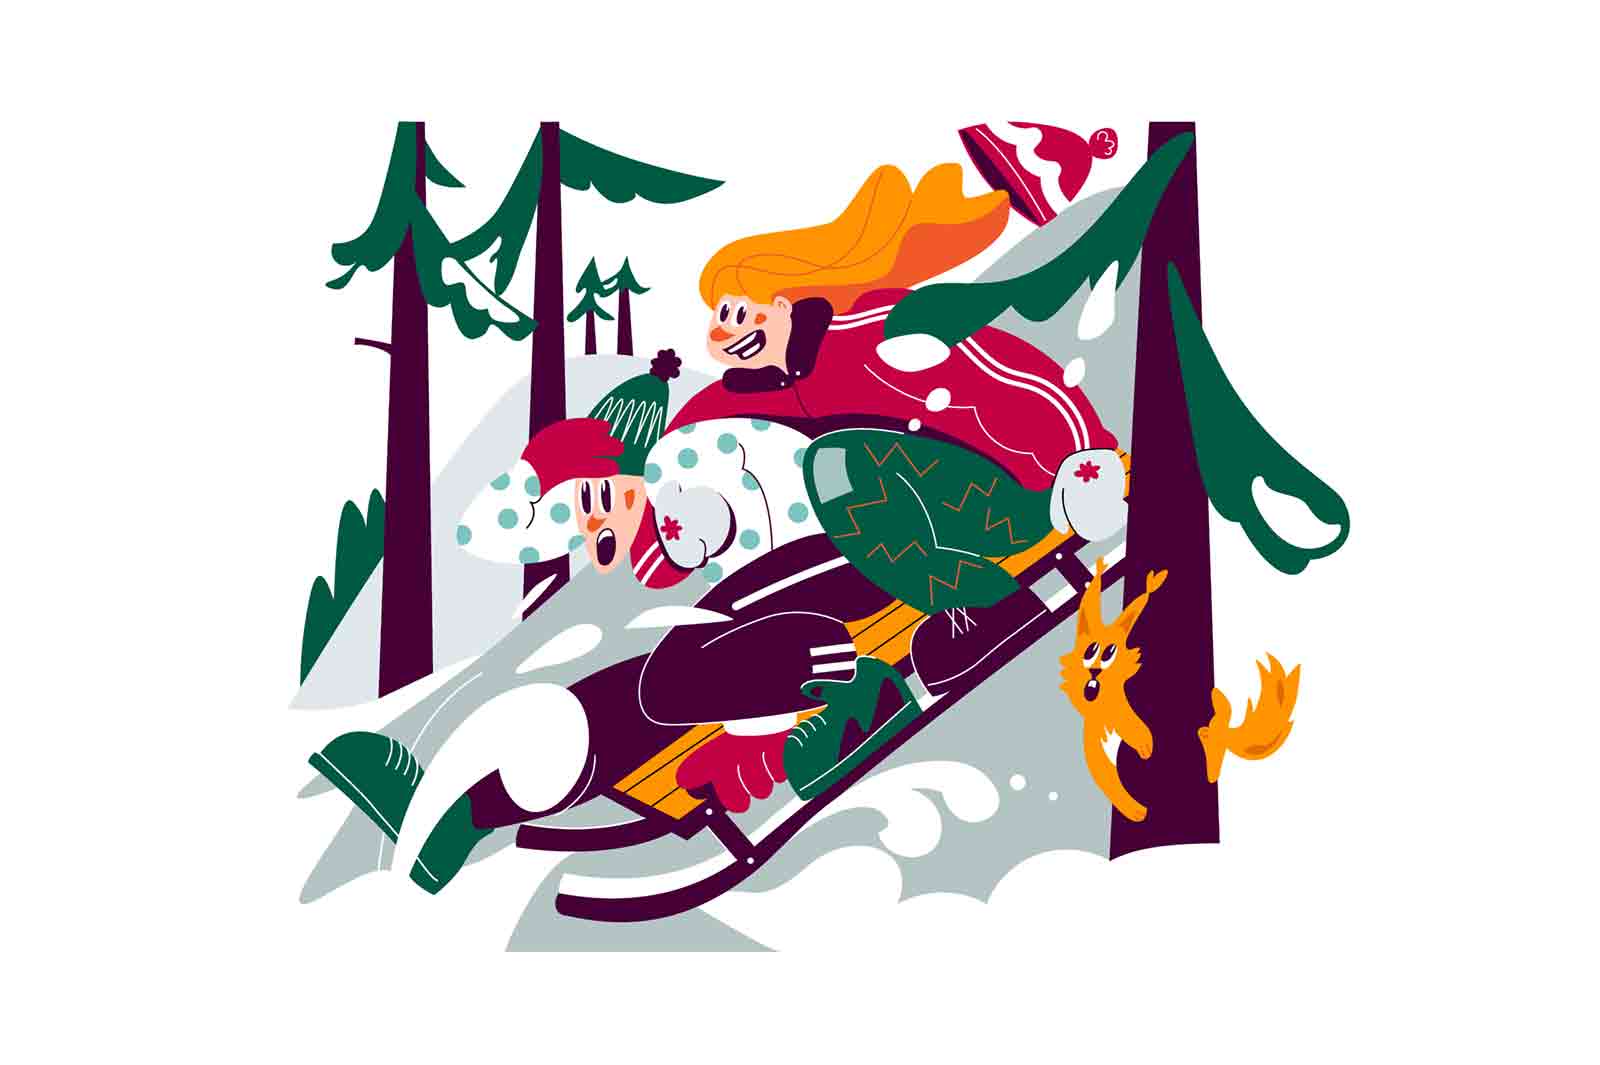 Girl and boy sledding together, winter outdoors activity vector illustration. Friends sledding down from slope flat style concept